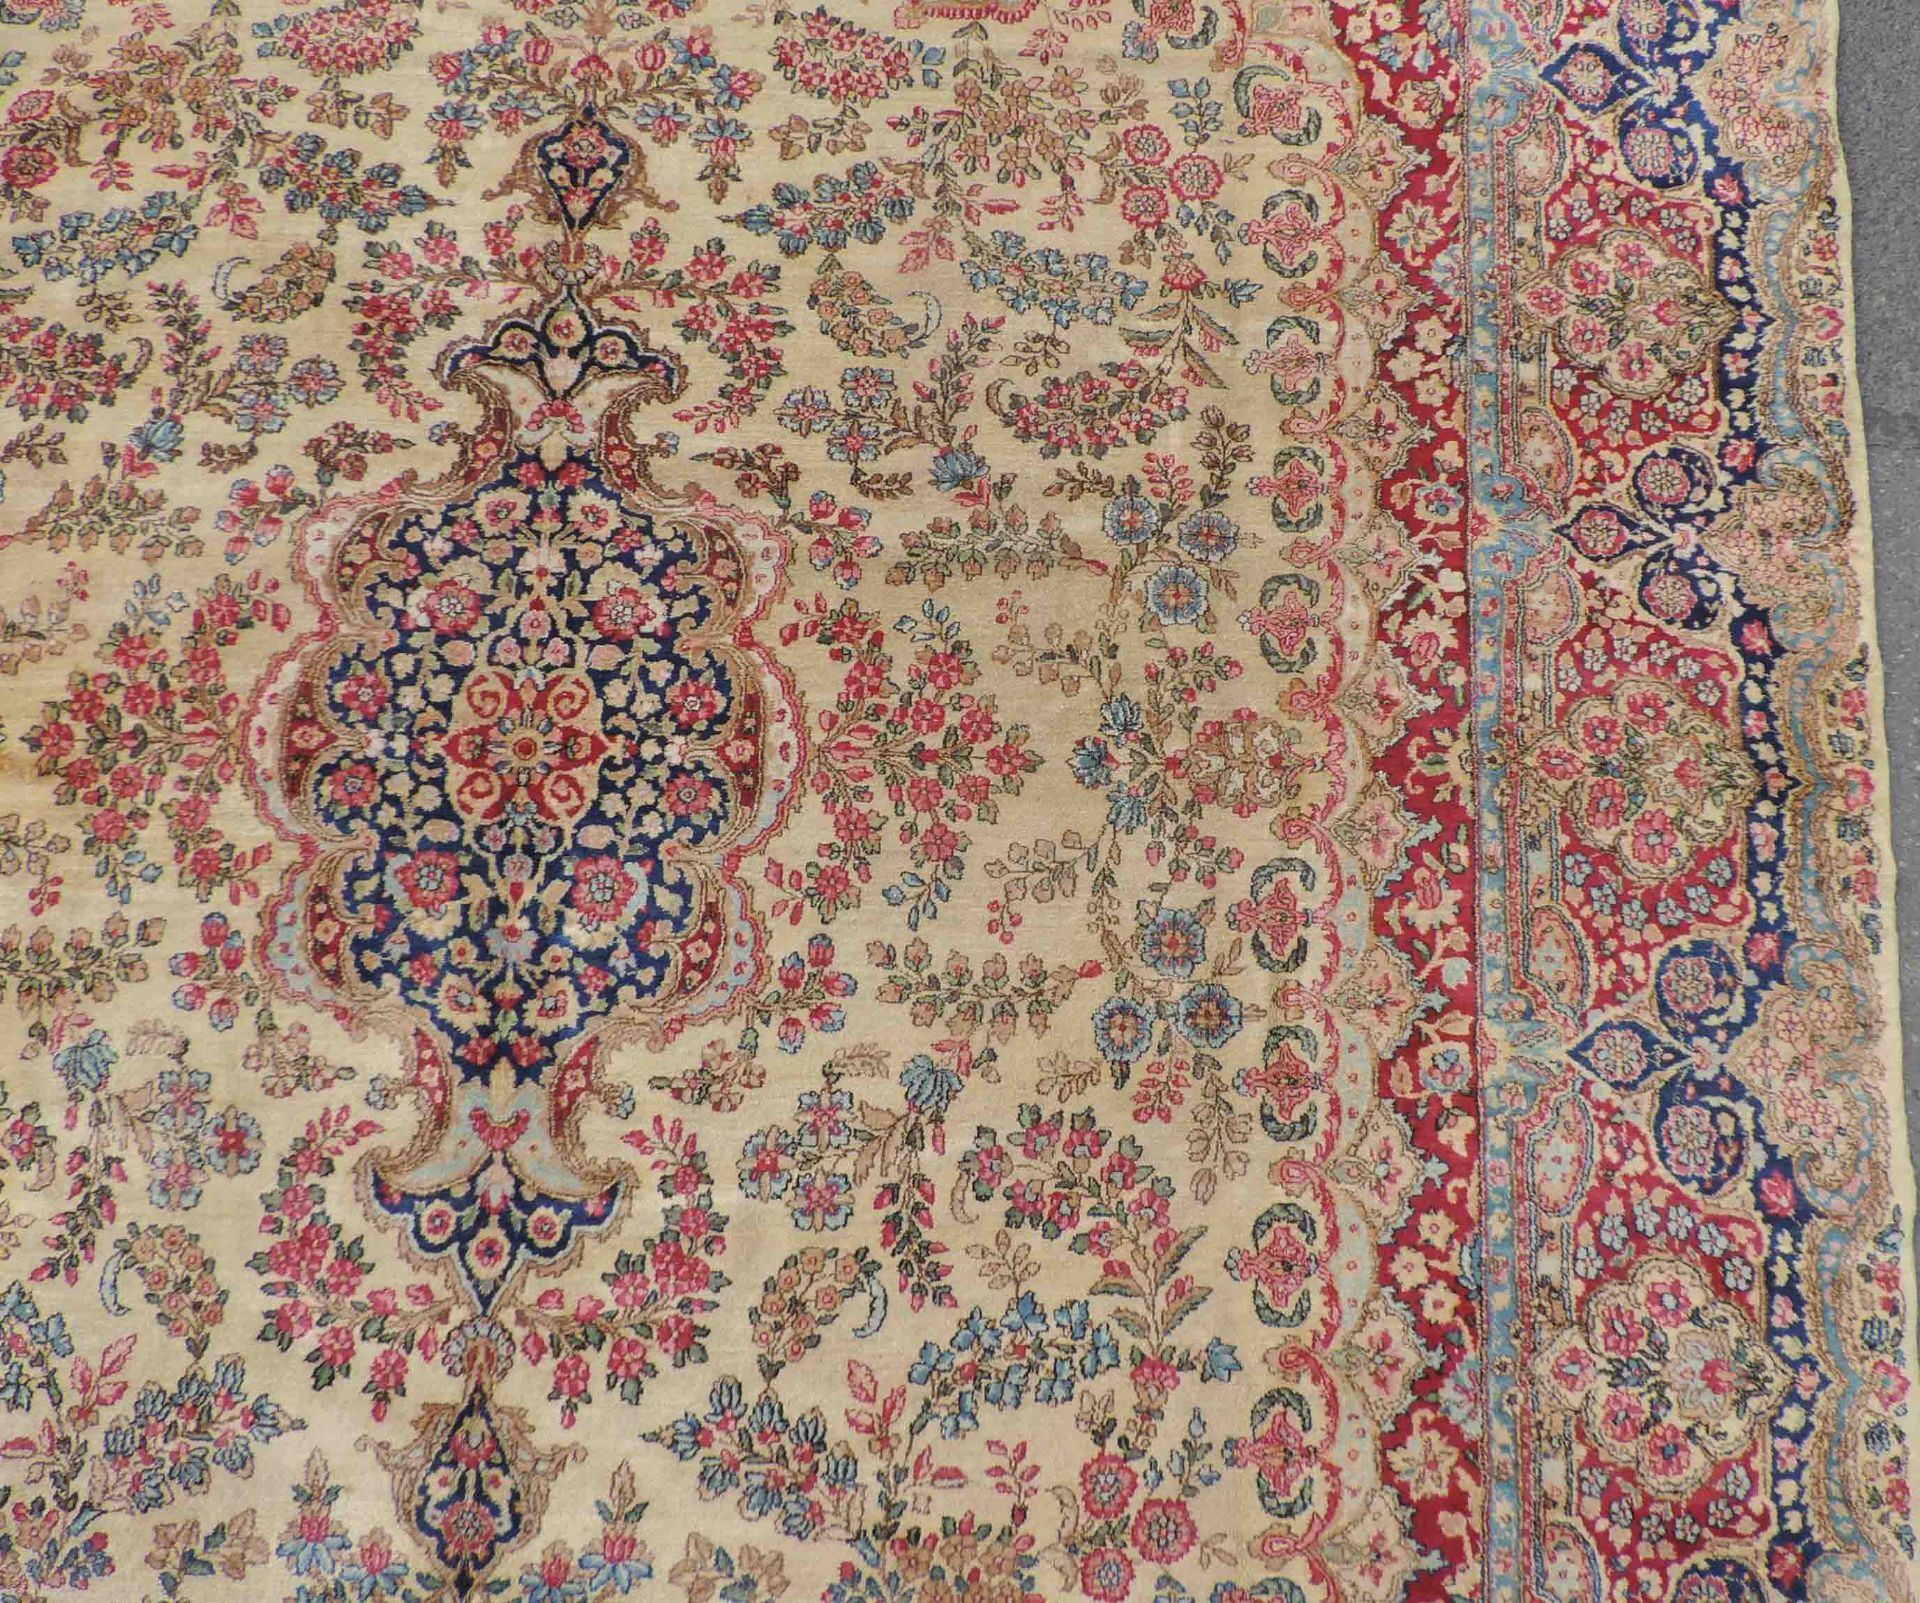 Kirman Persian carpet. Iran. Old, 1st half of the 20th century.420 cm x 297 cm. Knotted by hand. - Image 12 of 14